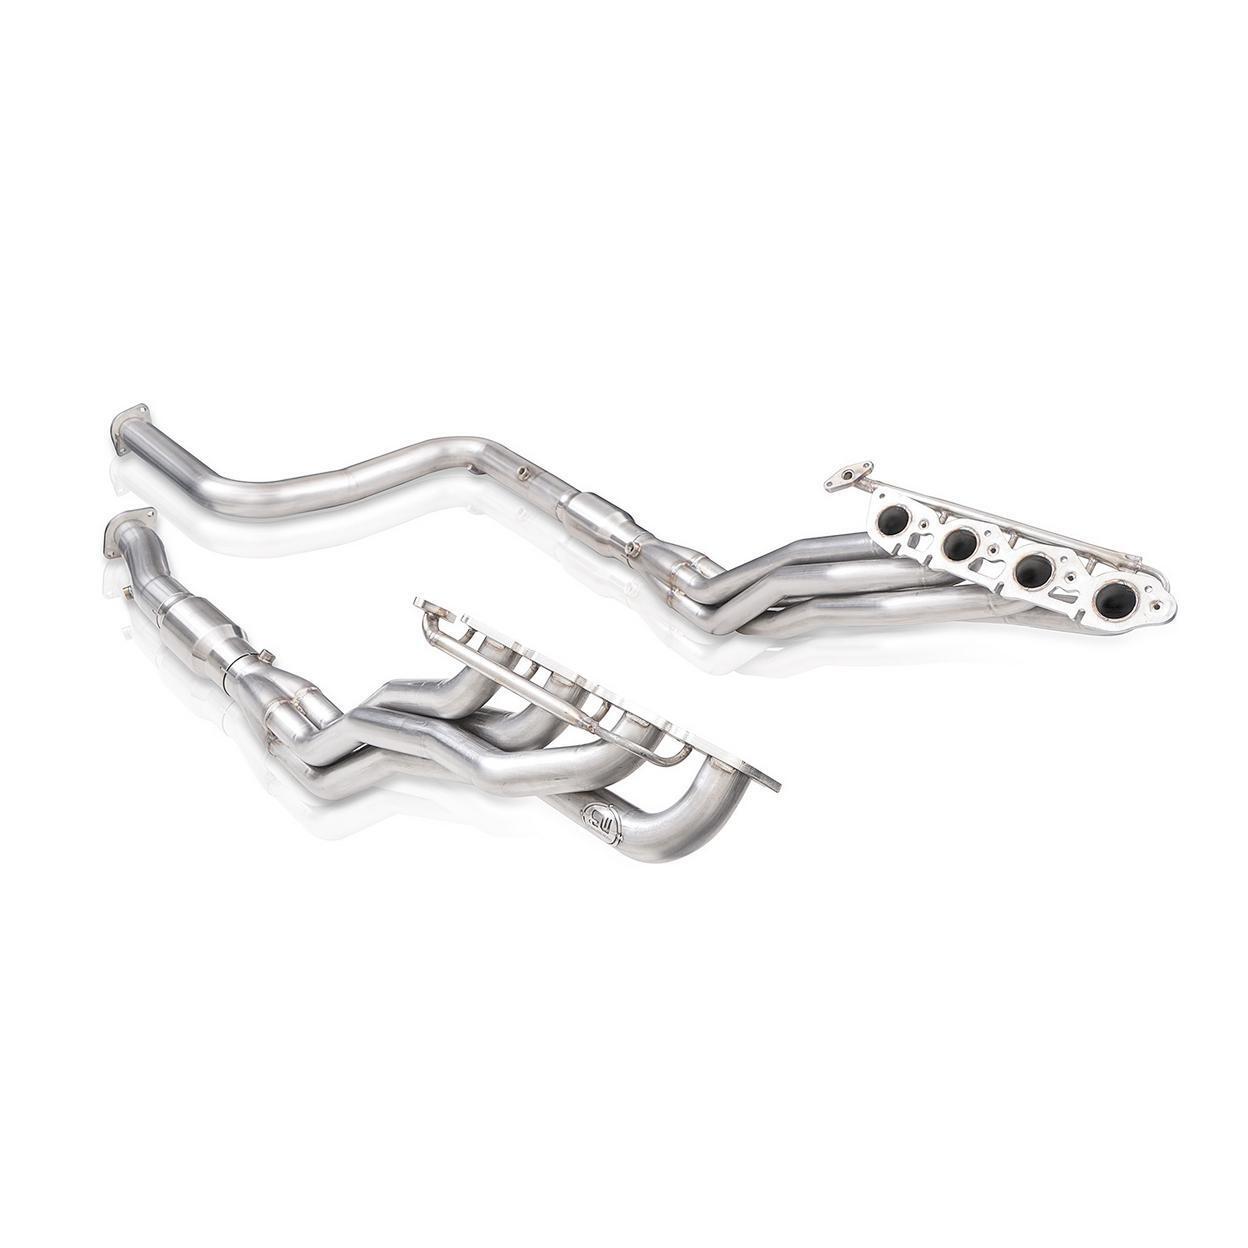 Exhaust Header Pipe Kit for 2014 Toyota Toyota Limited 5.7L V8 FLEX DOHC